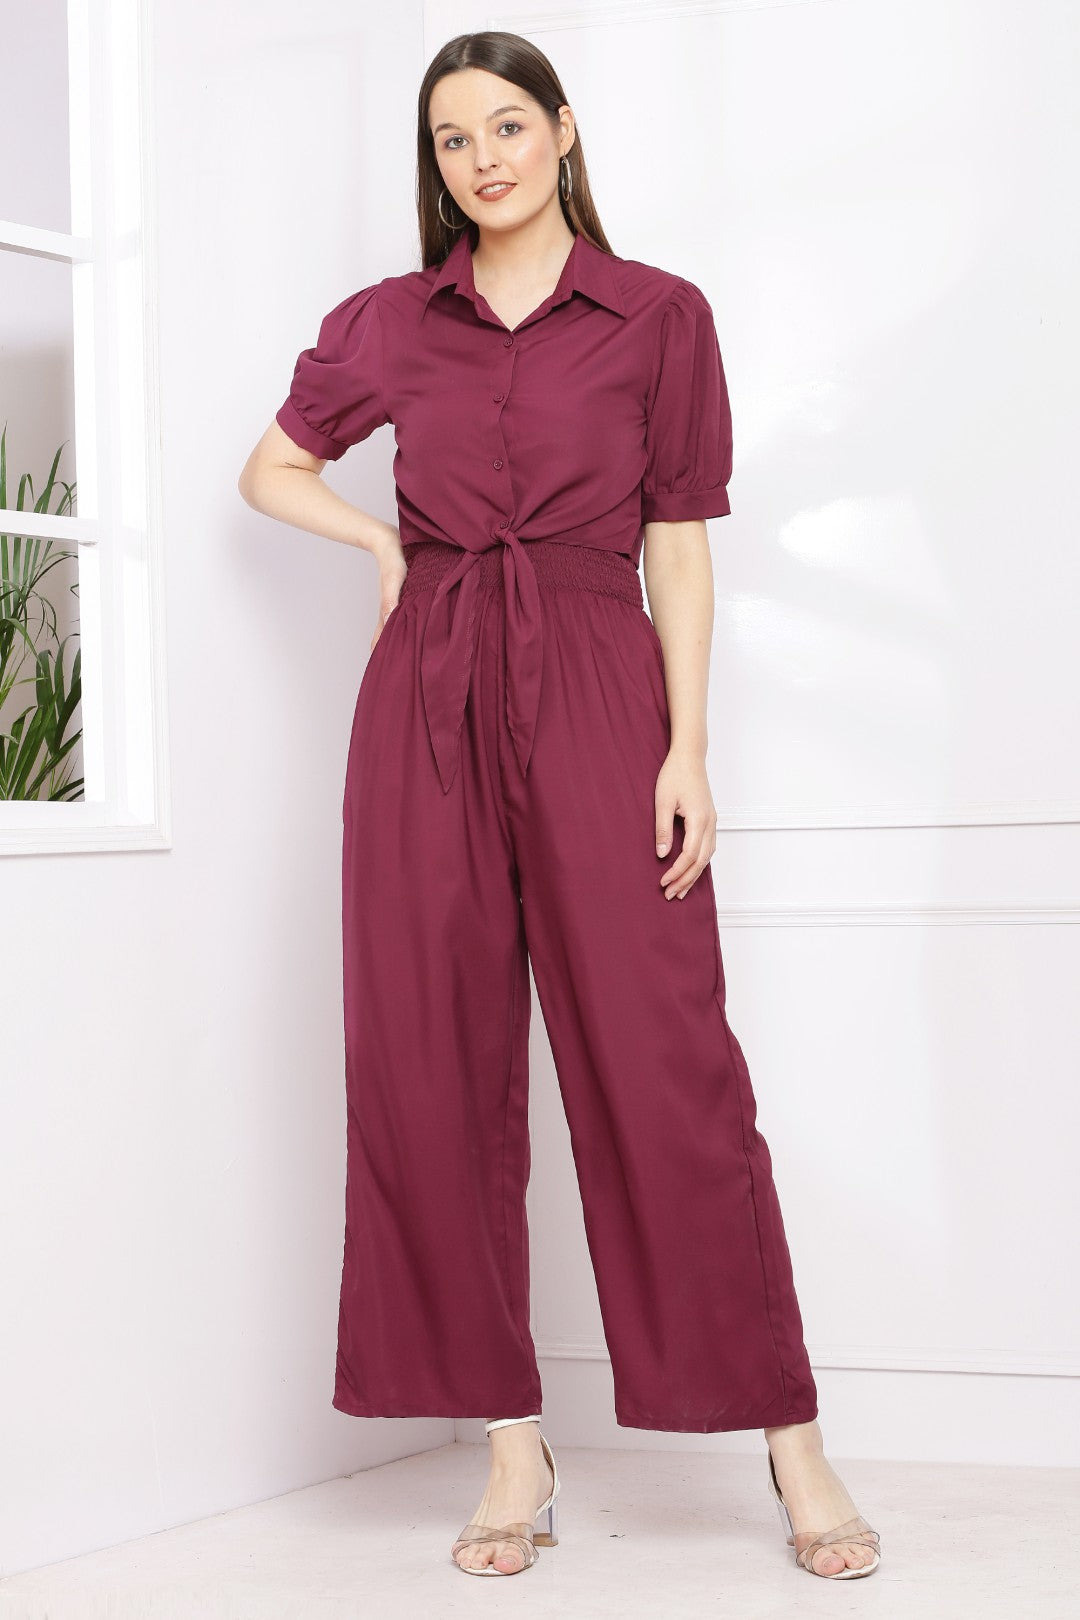 BRANDED SOLID 2 - Piece Jumpsuits For Women & Girls